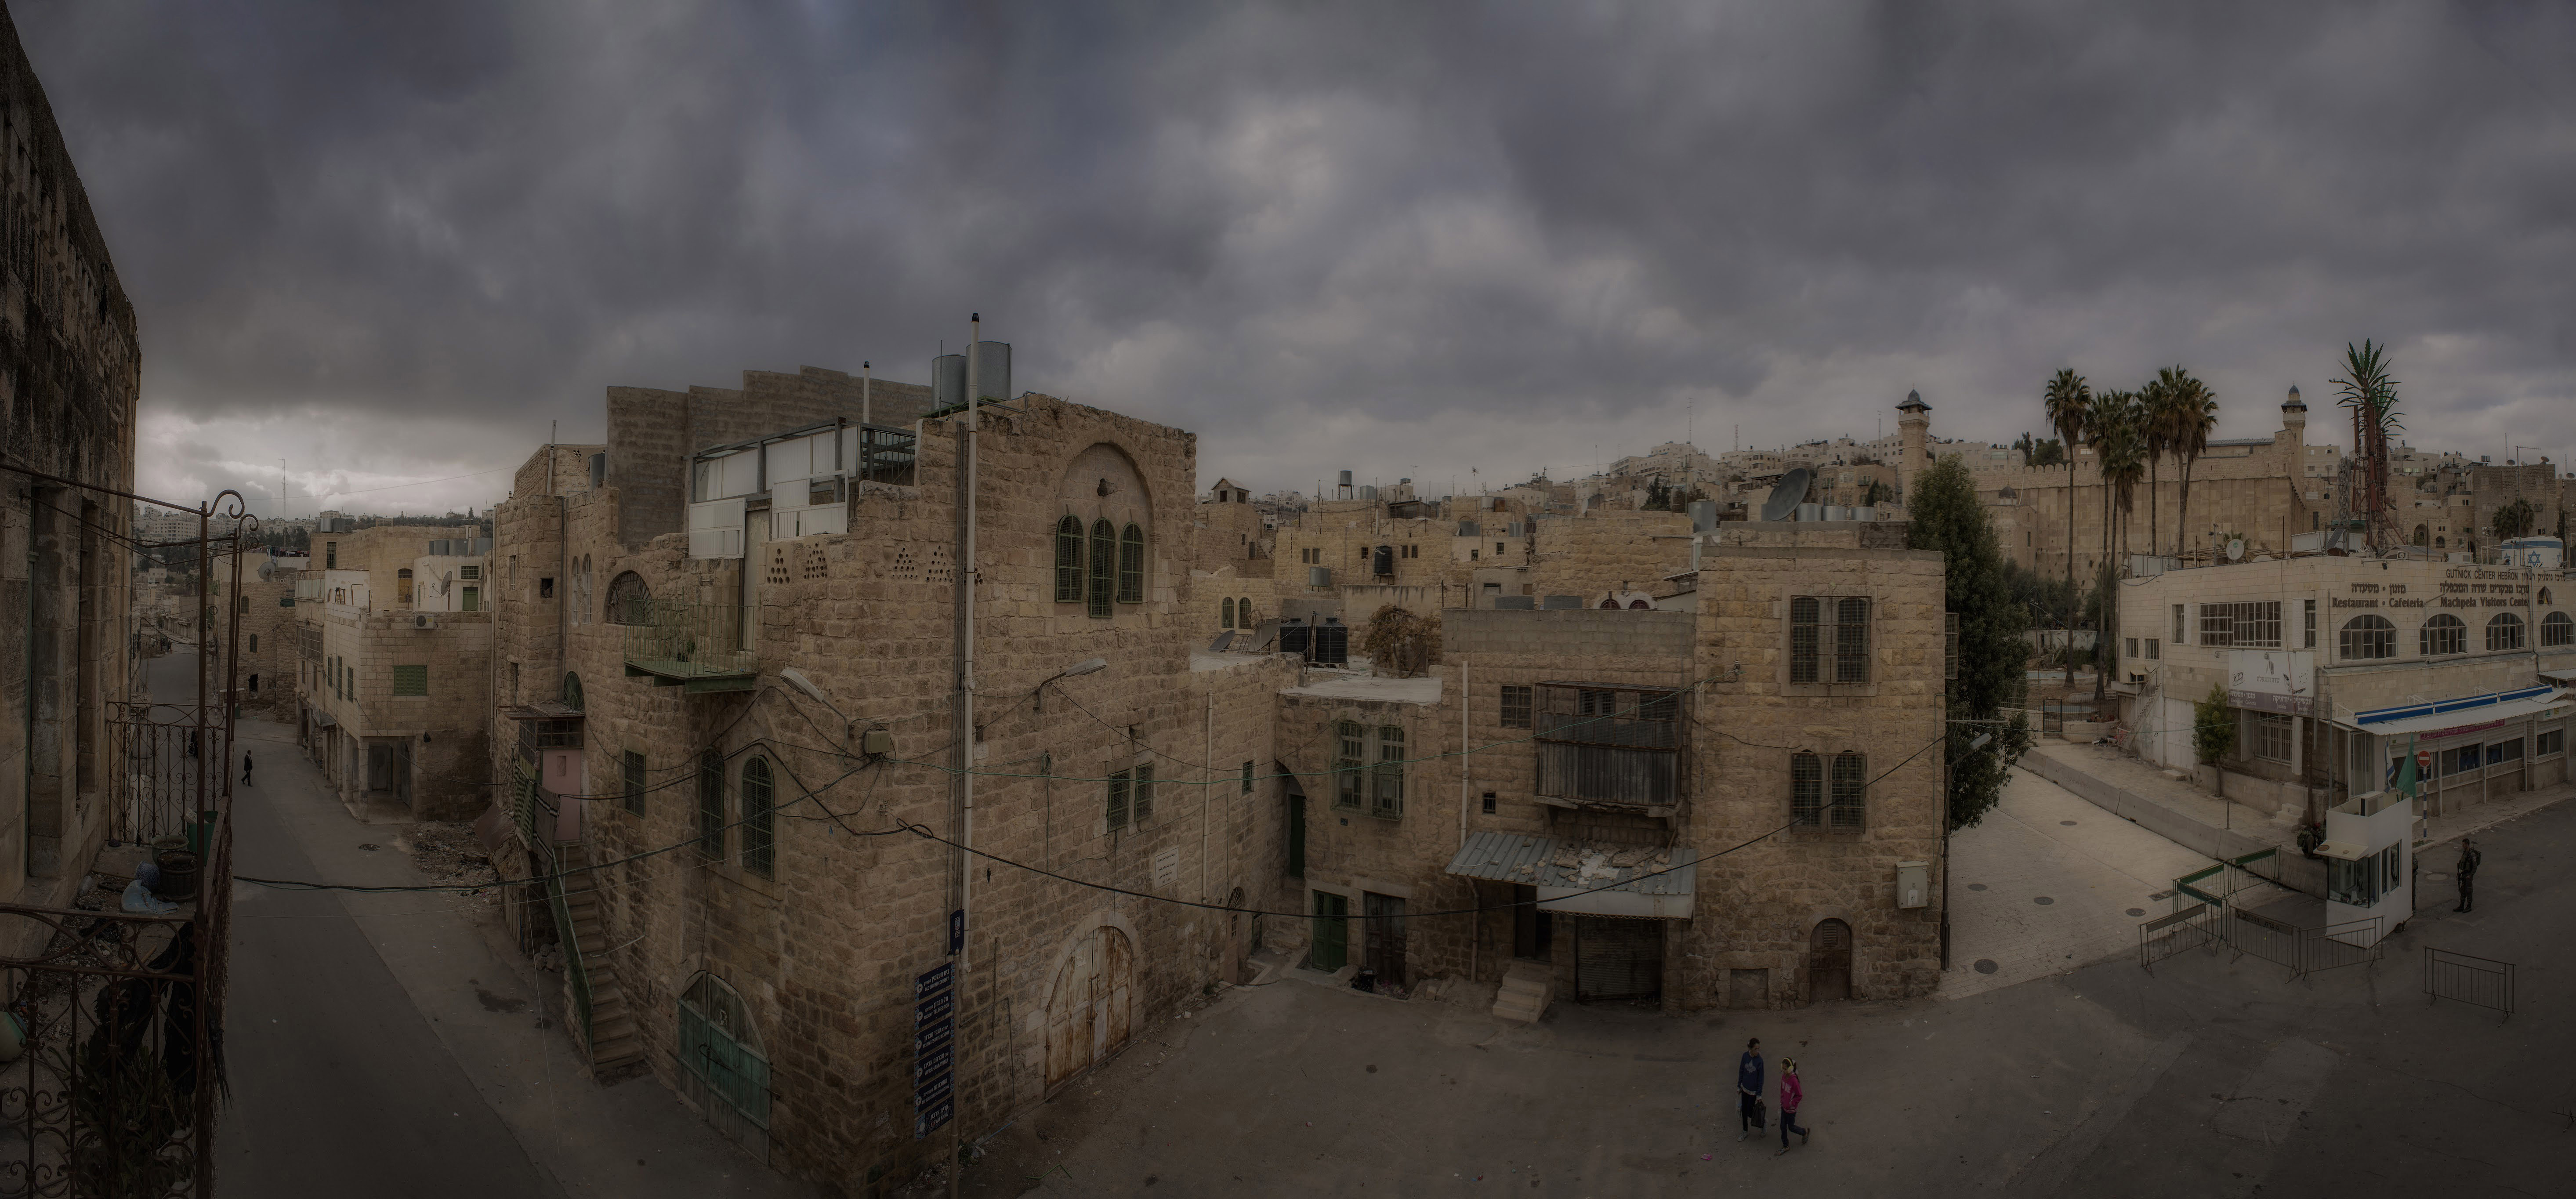 Hebron city in Palestine, A historic holy city, where the tombs of the prophets and their wives, It was a city full of residents, But the occupation came on the pretext of religious, expelled its residents and committed massacres, And make it a semi-empty city